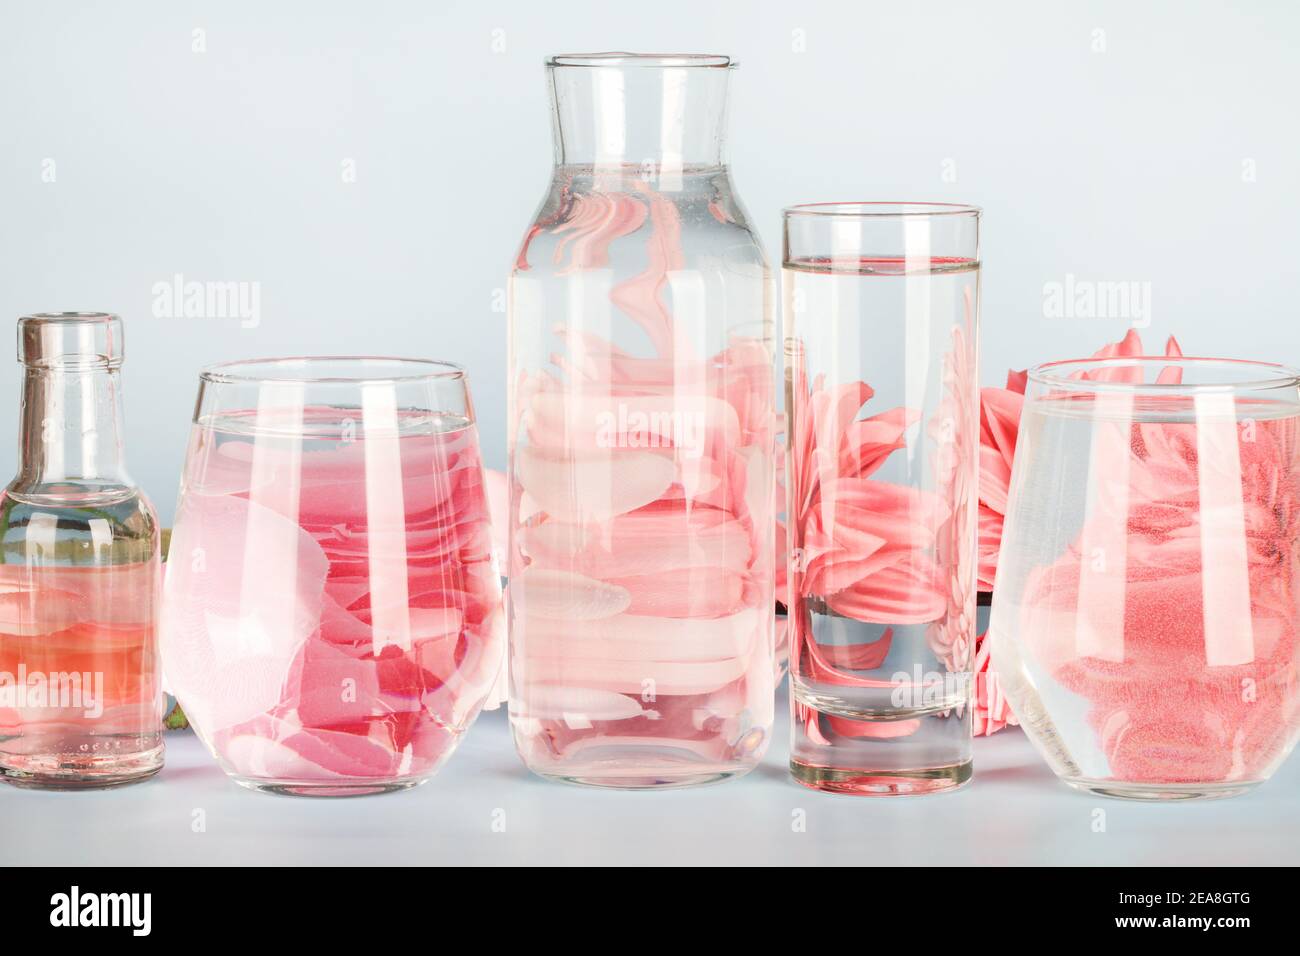 pink flowers distorted through water in glasses and bottle on blue background. Home decor, eco friendly, relax, gardening concept. copy space Stock Photo